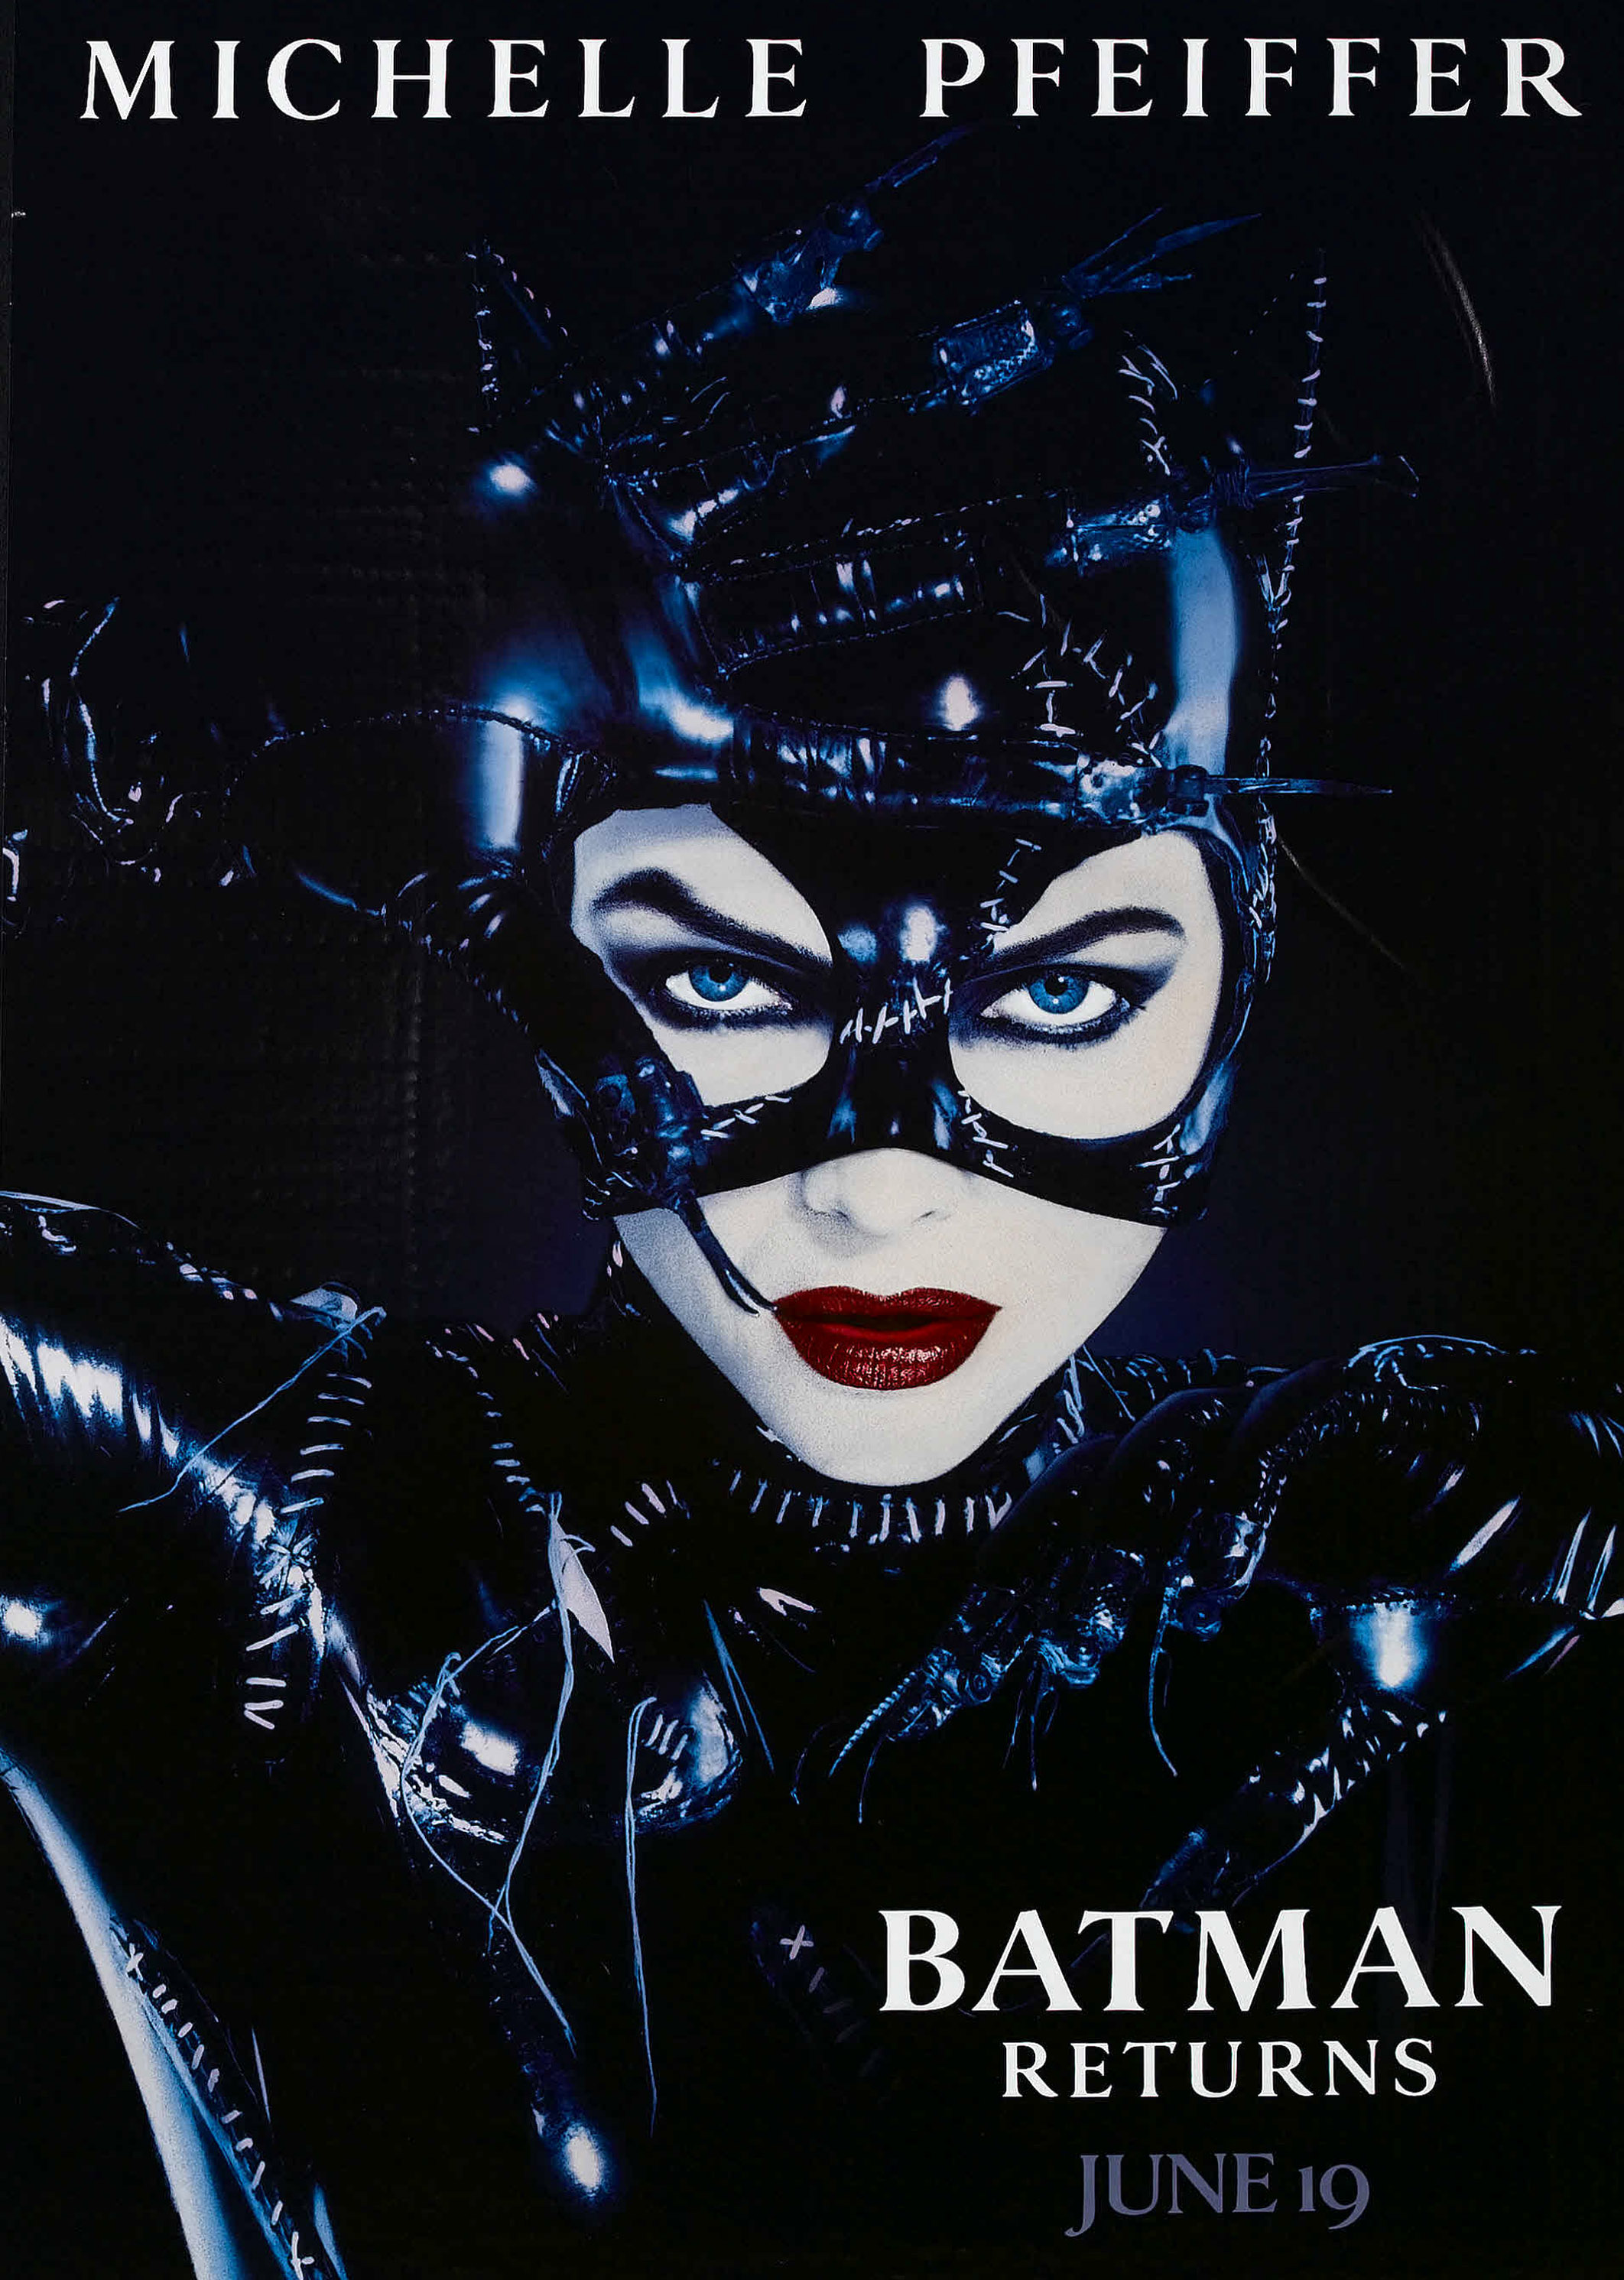 Catwoman - The Dark Knight Rises [3] wallpaper - Movie wallpapers - #12982